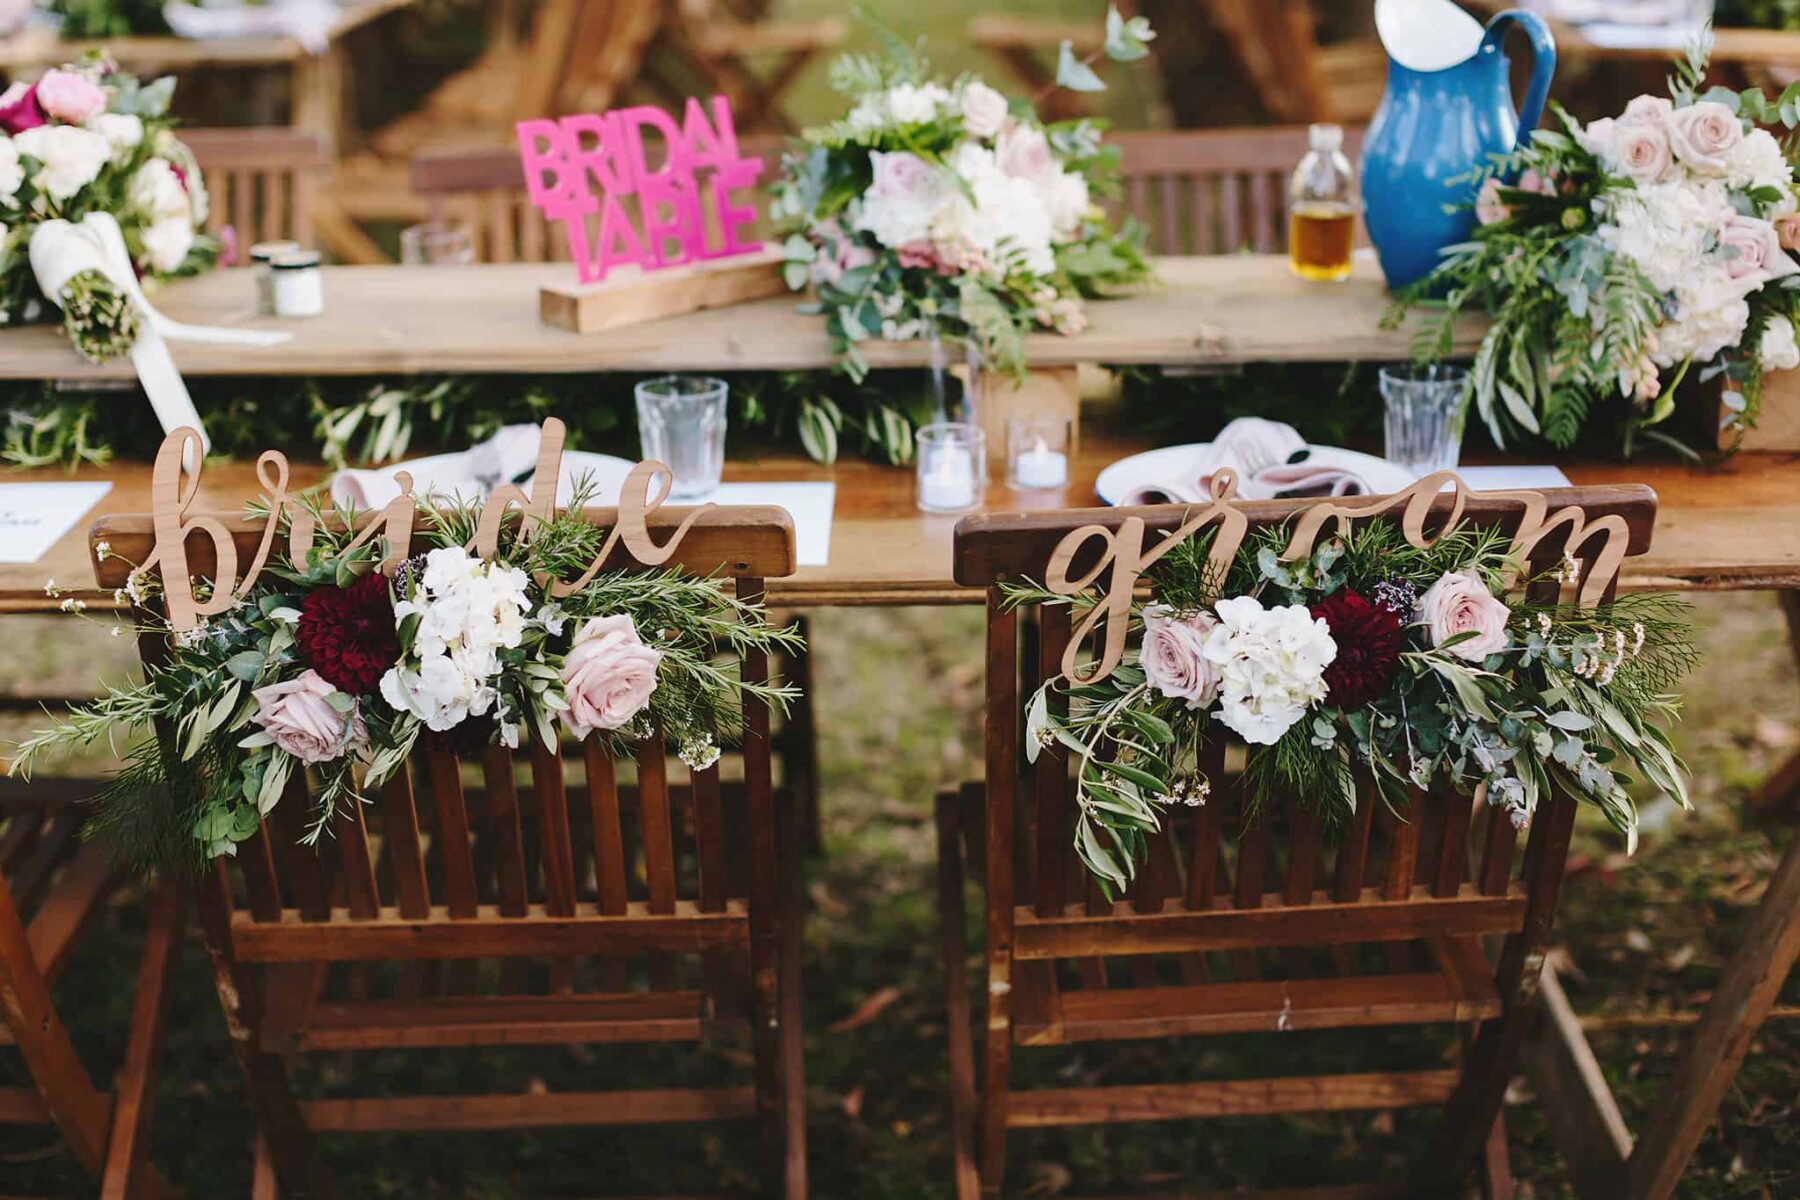 fun bridal table with bride and groom chair signs